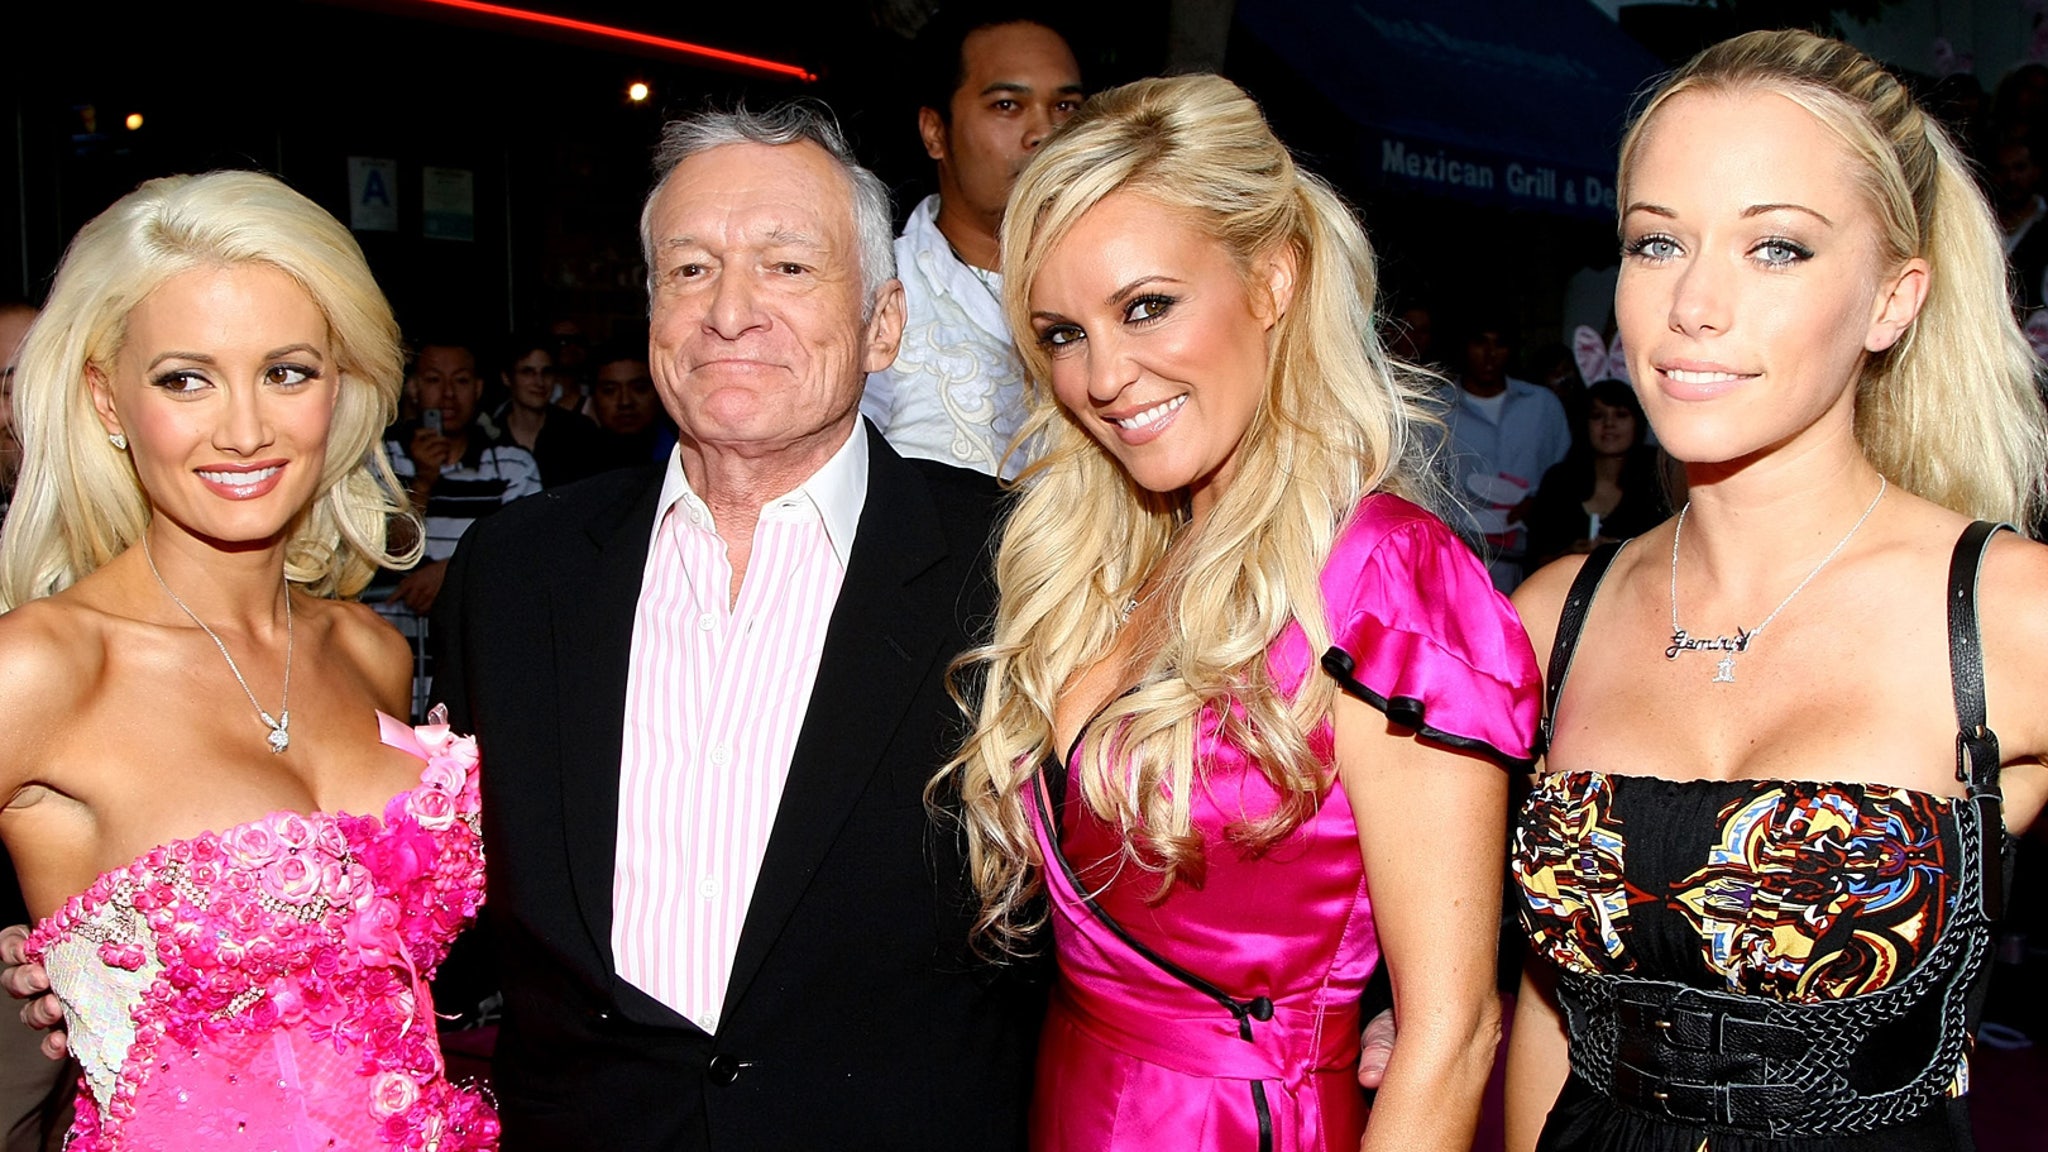 Holly Madison Details Sex With Hugh Hefner, Life at Playboy Mansion photo pic